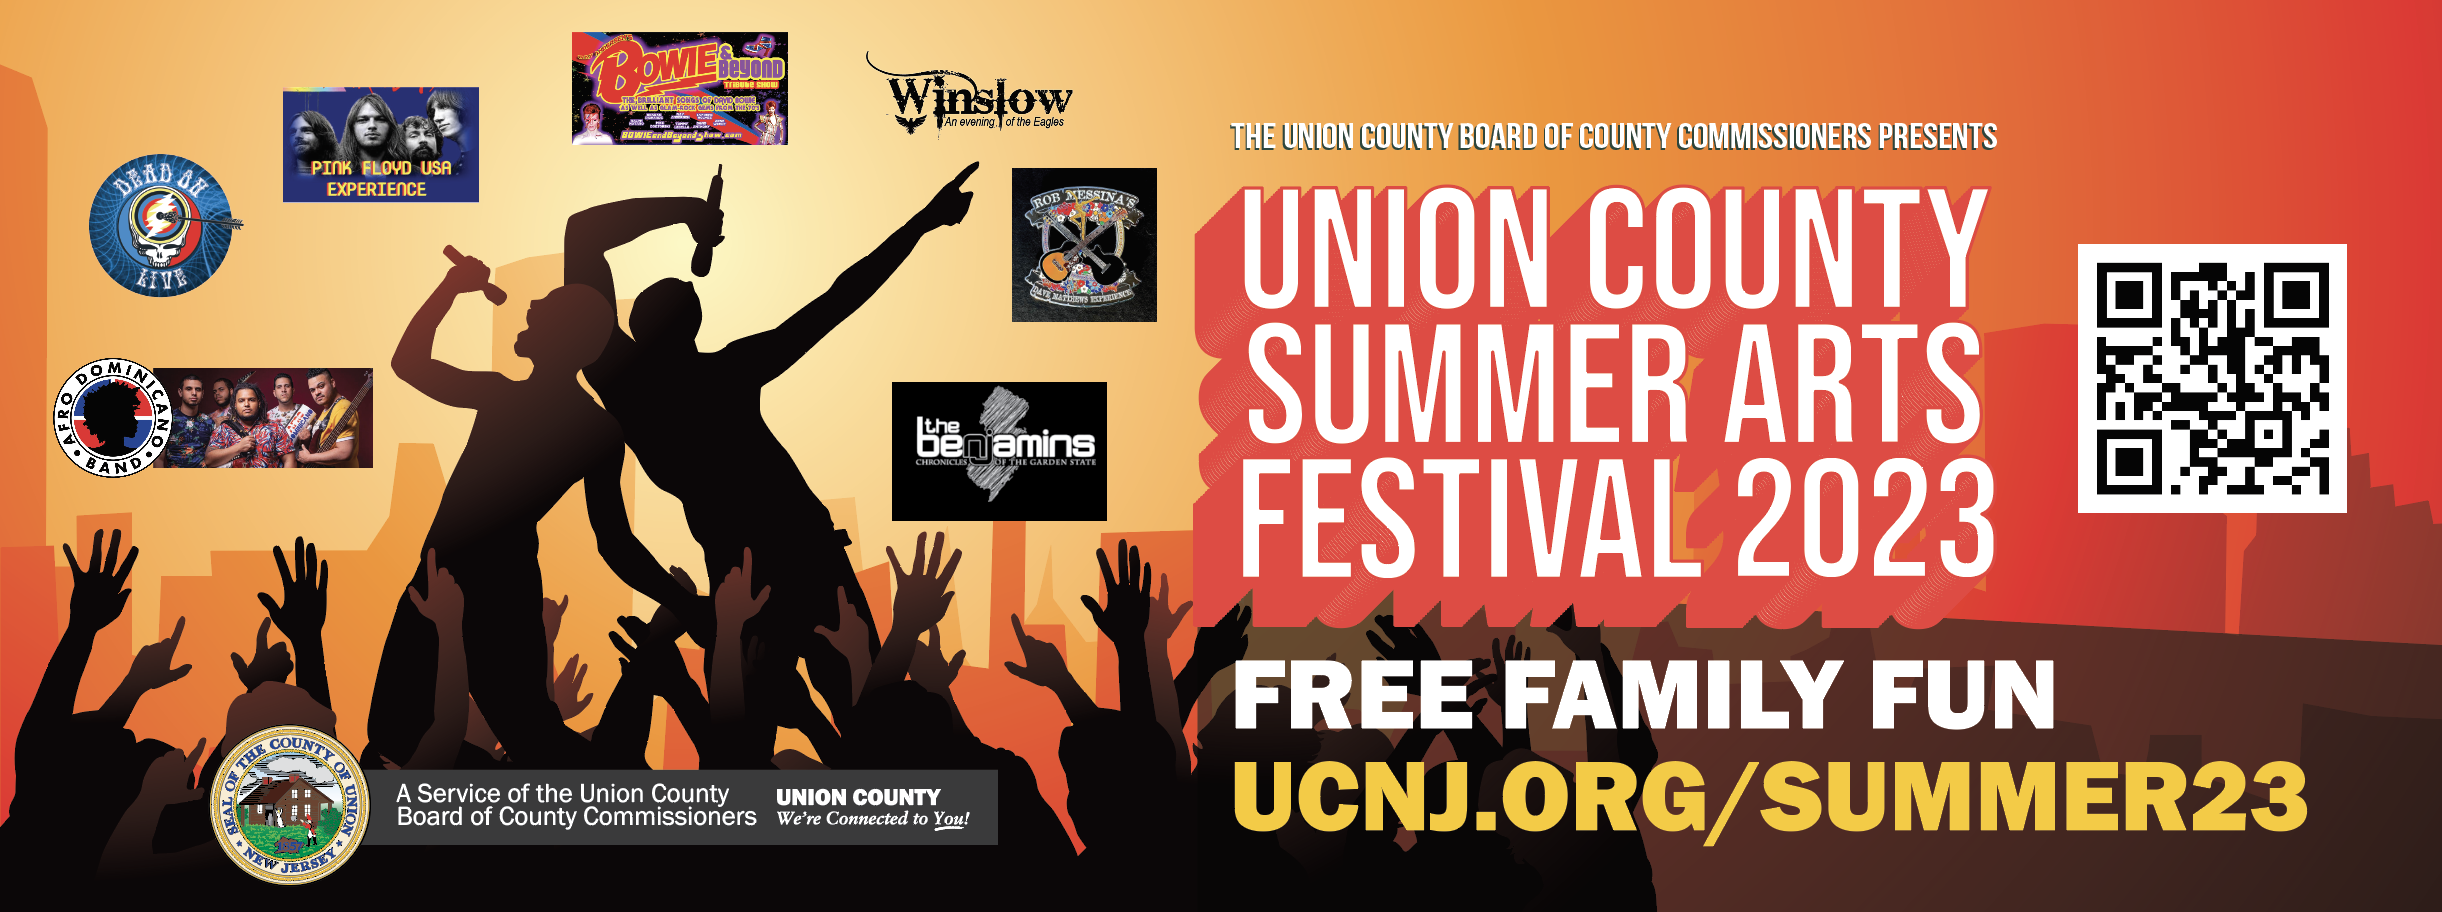 Union County returns with a Summer of free Concerts in Parks County